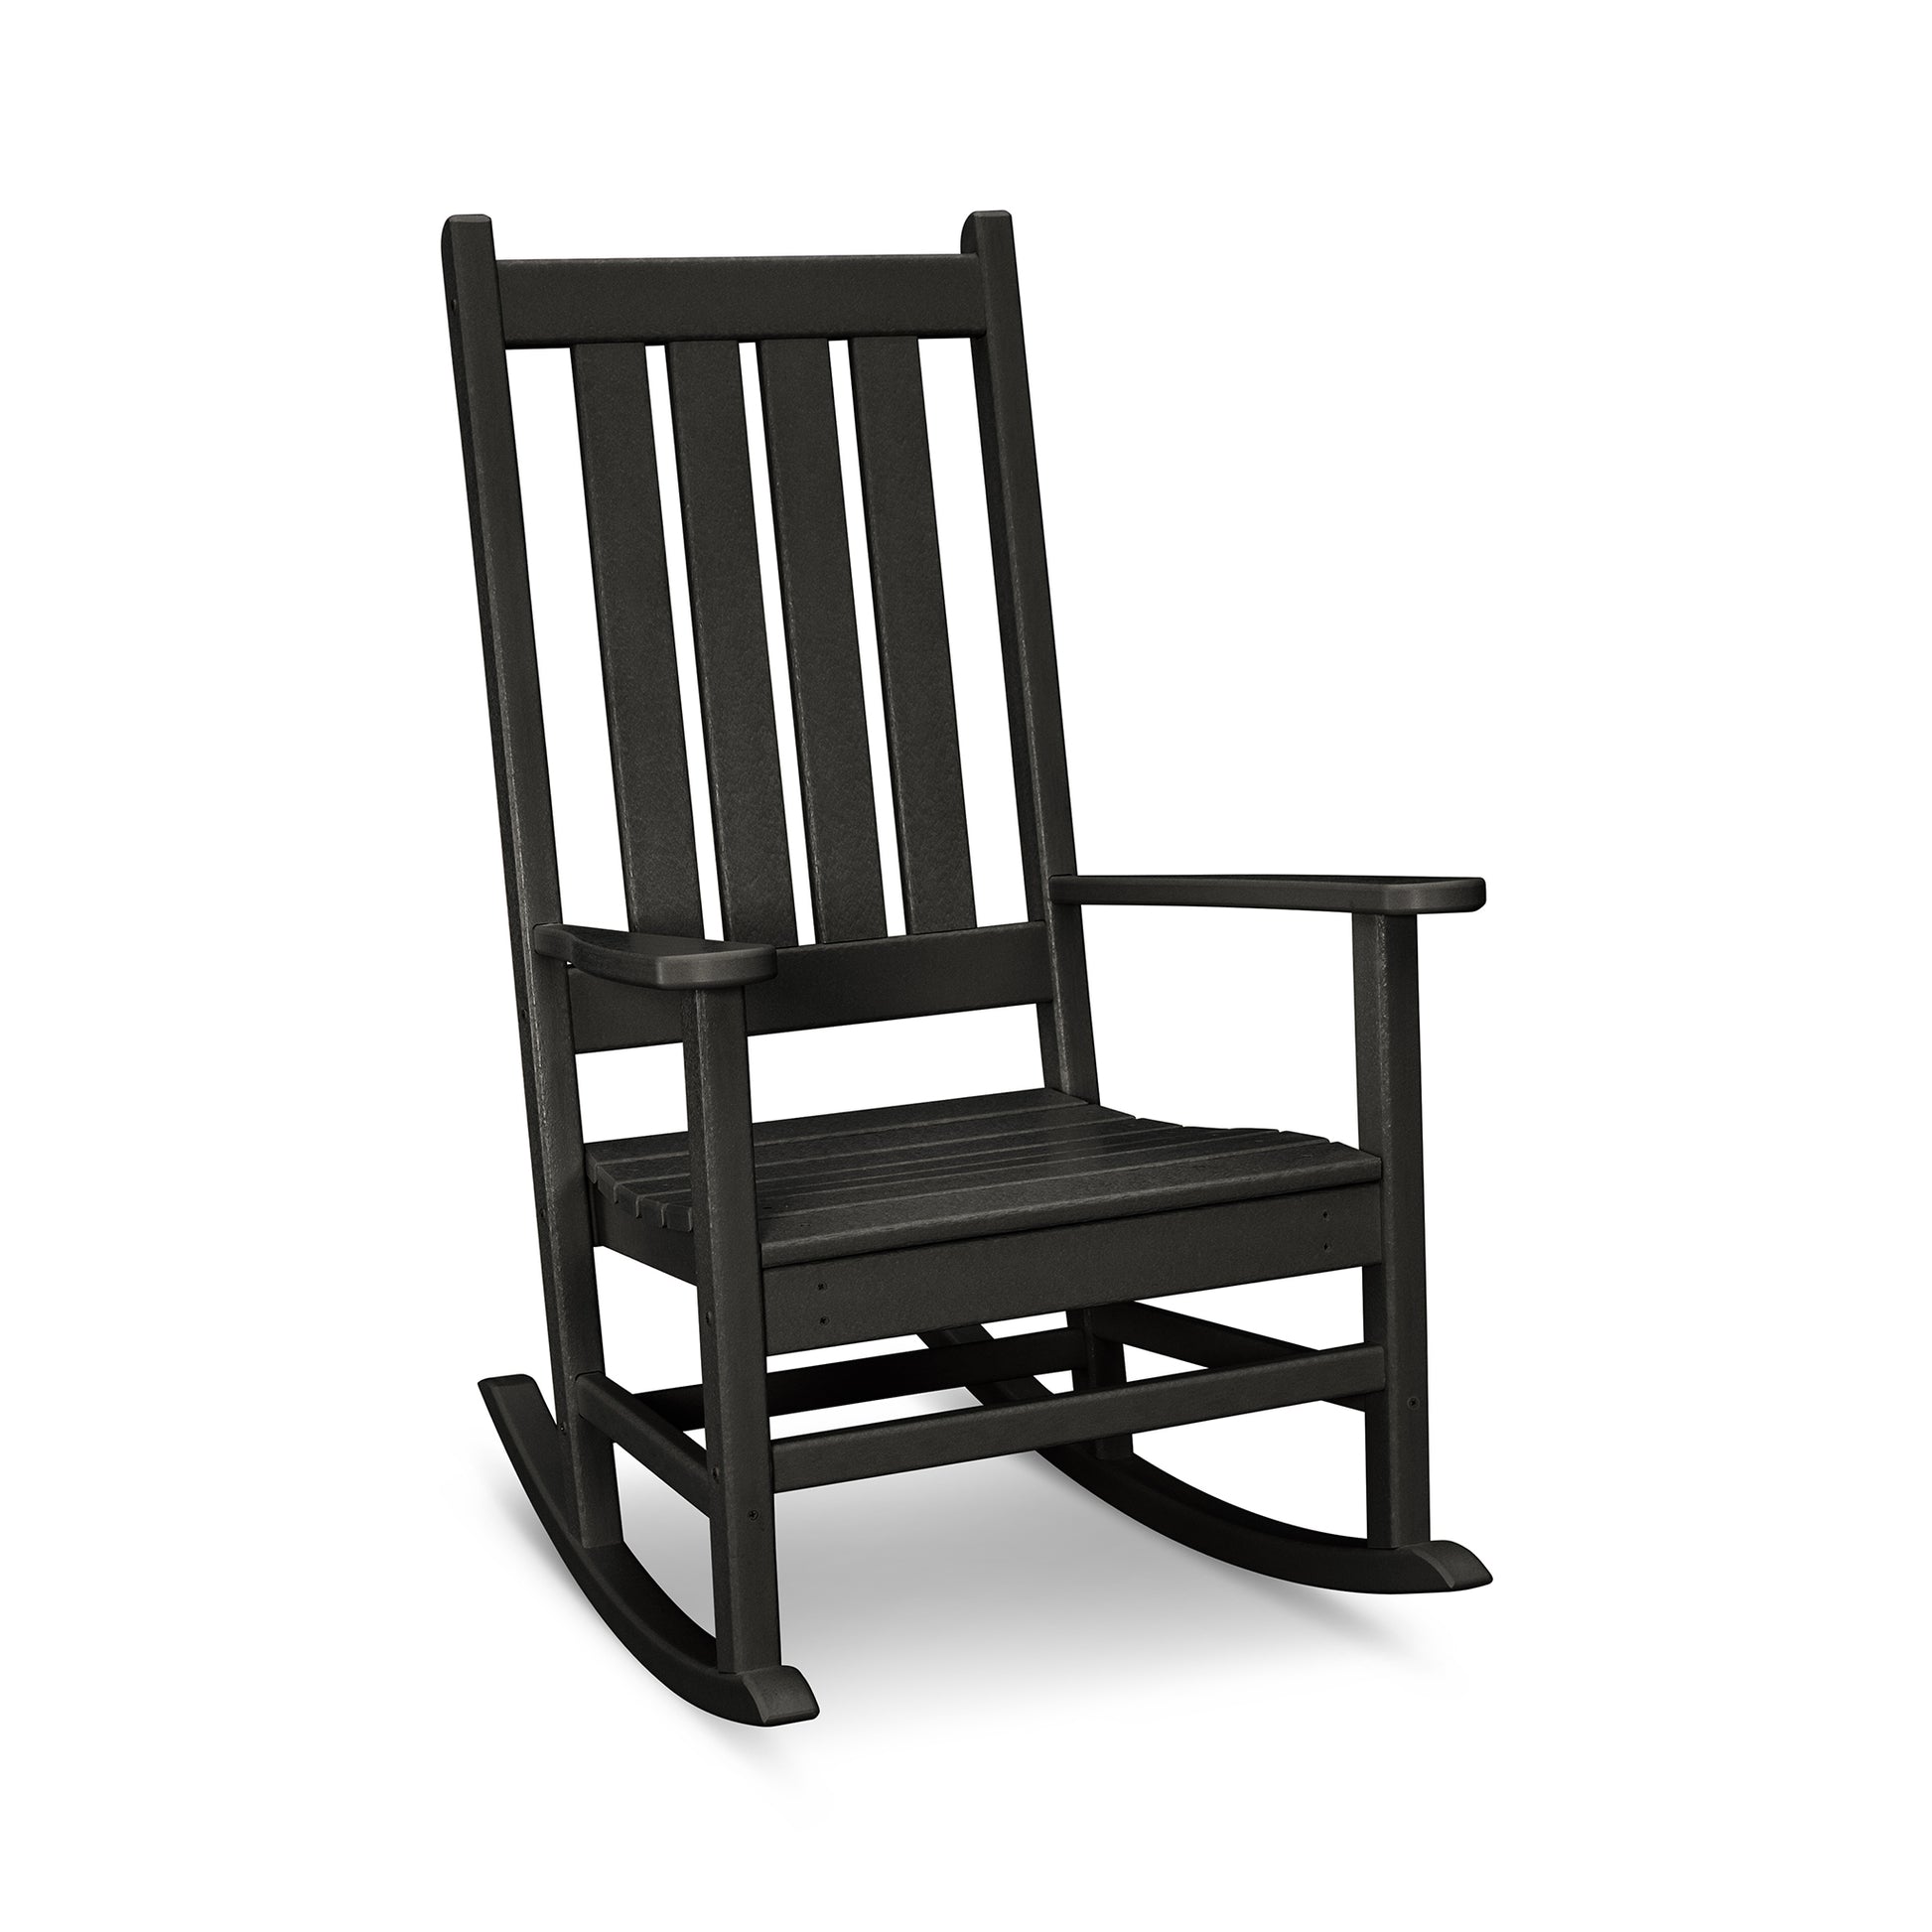 A black POLYWOOD® Vineyard Porch Rocking Chair with vertical slats on the back and seat, featuring armrests and curved rockers, isolated on a white background.